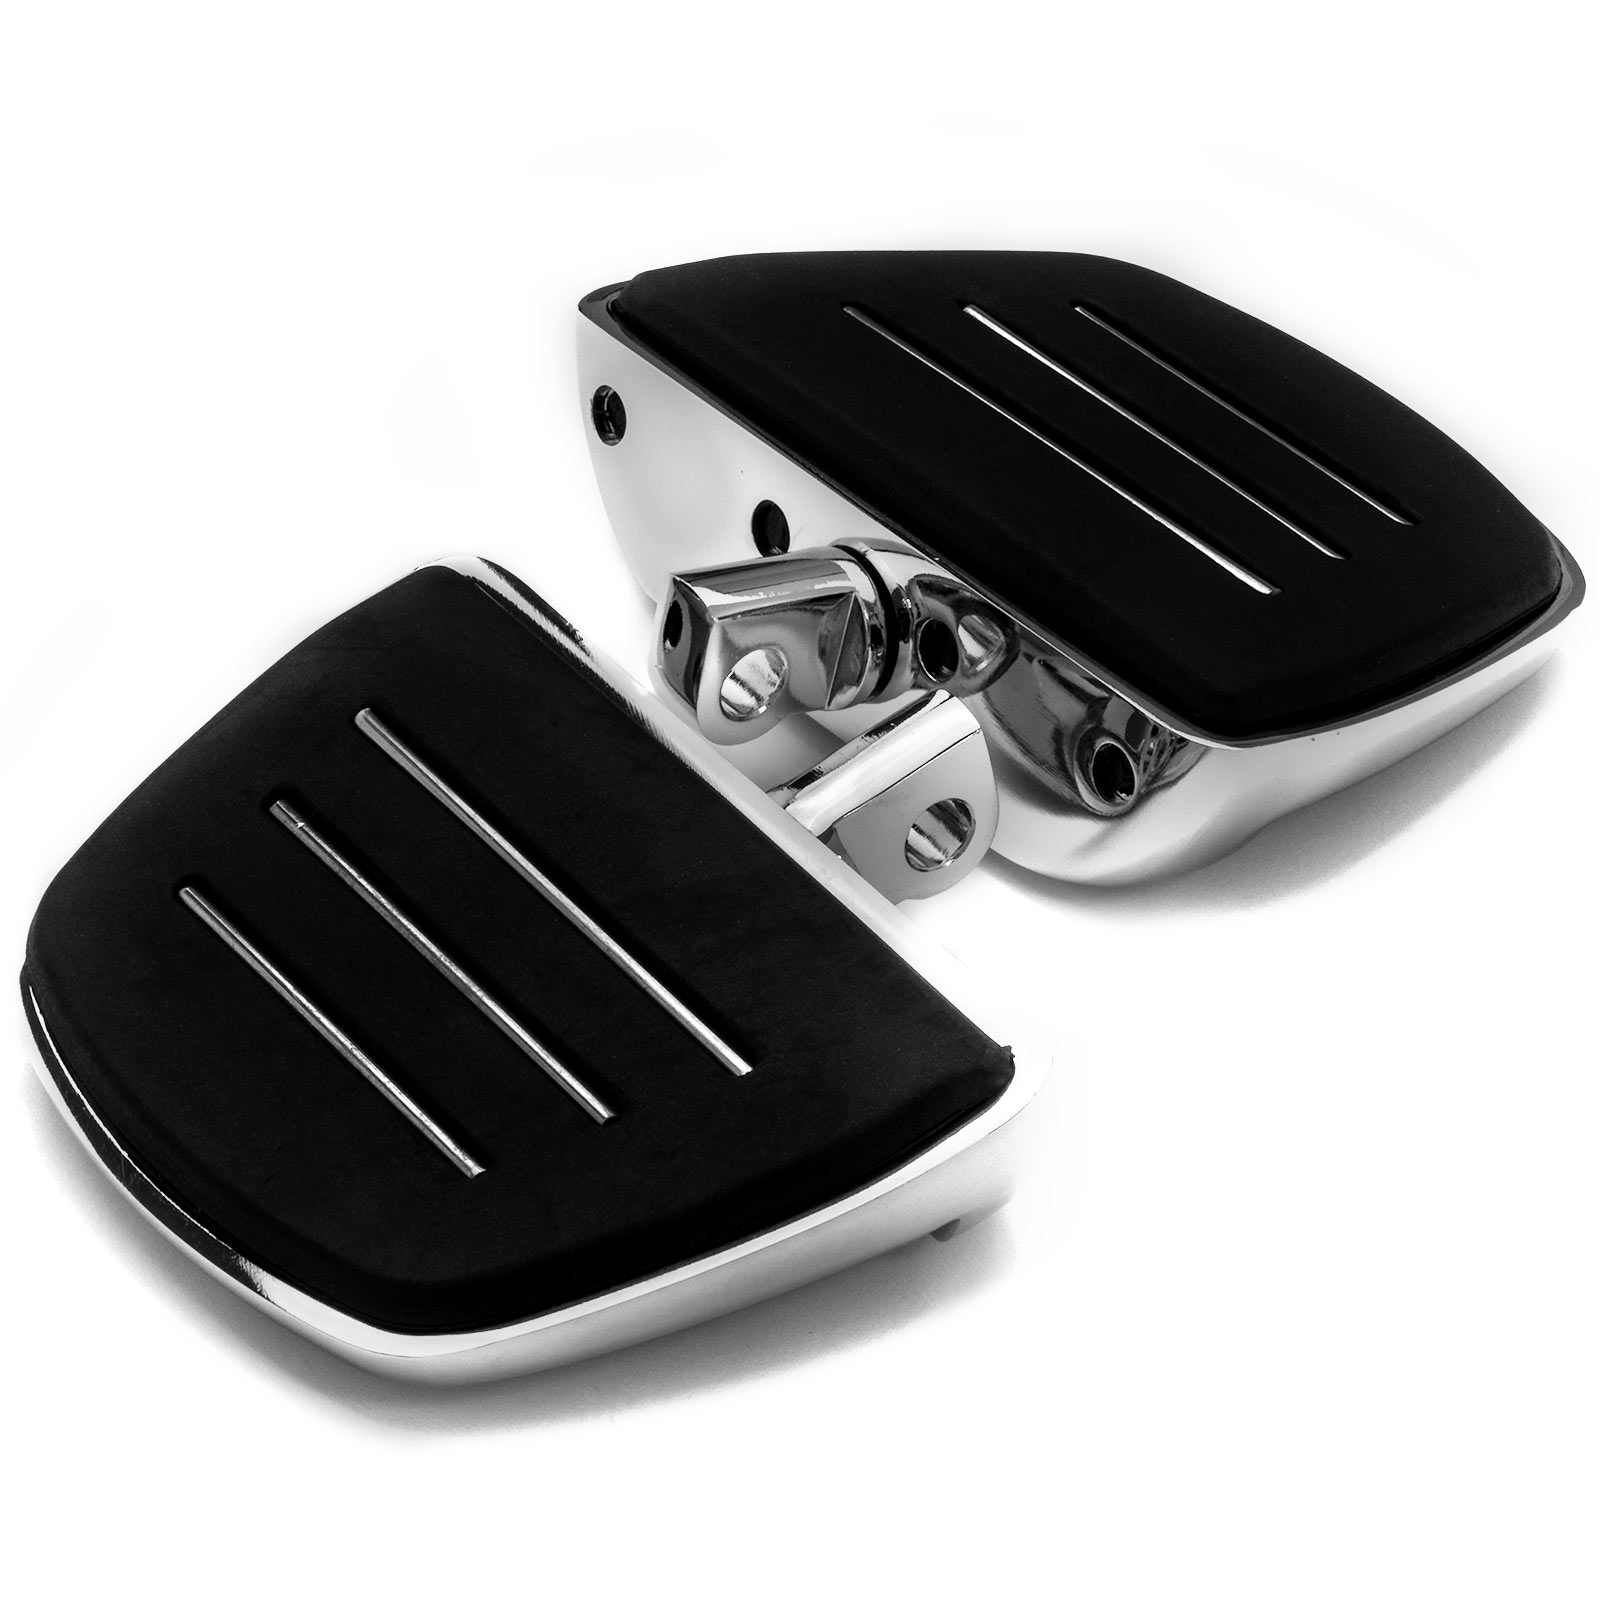 Krator Chrome Mini Board Floorboards Footpegs Compatible with 2001-2003 Harley Davidson Dyna Super Glide T Sport FXDXT